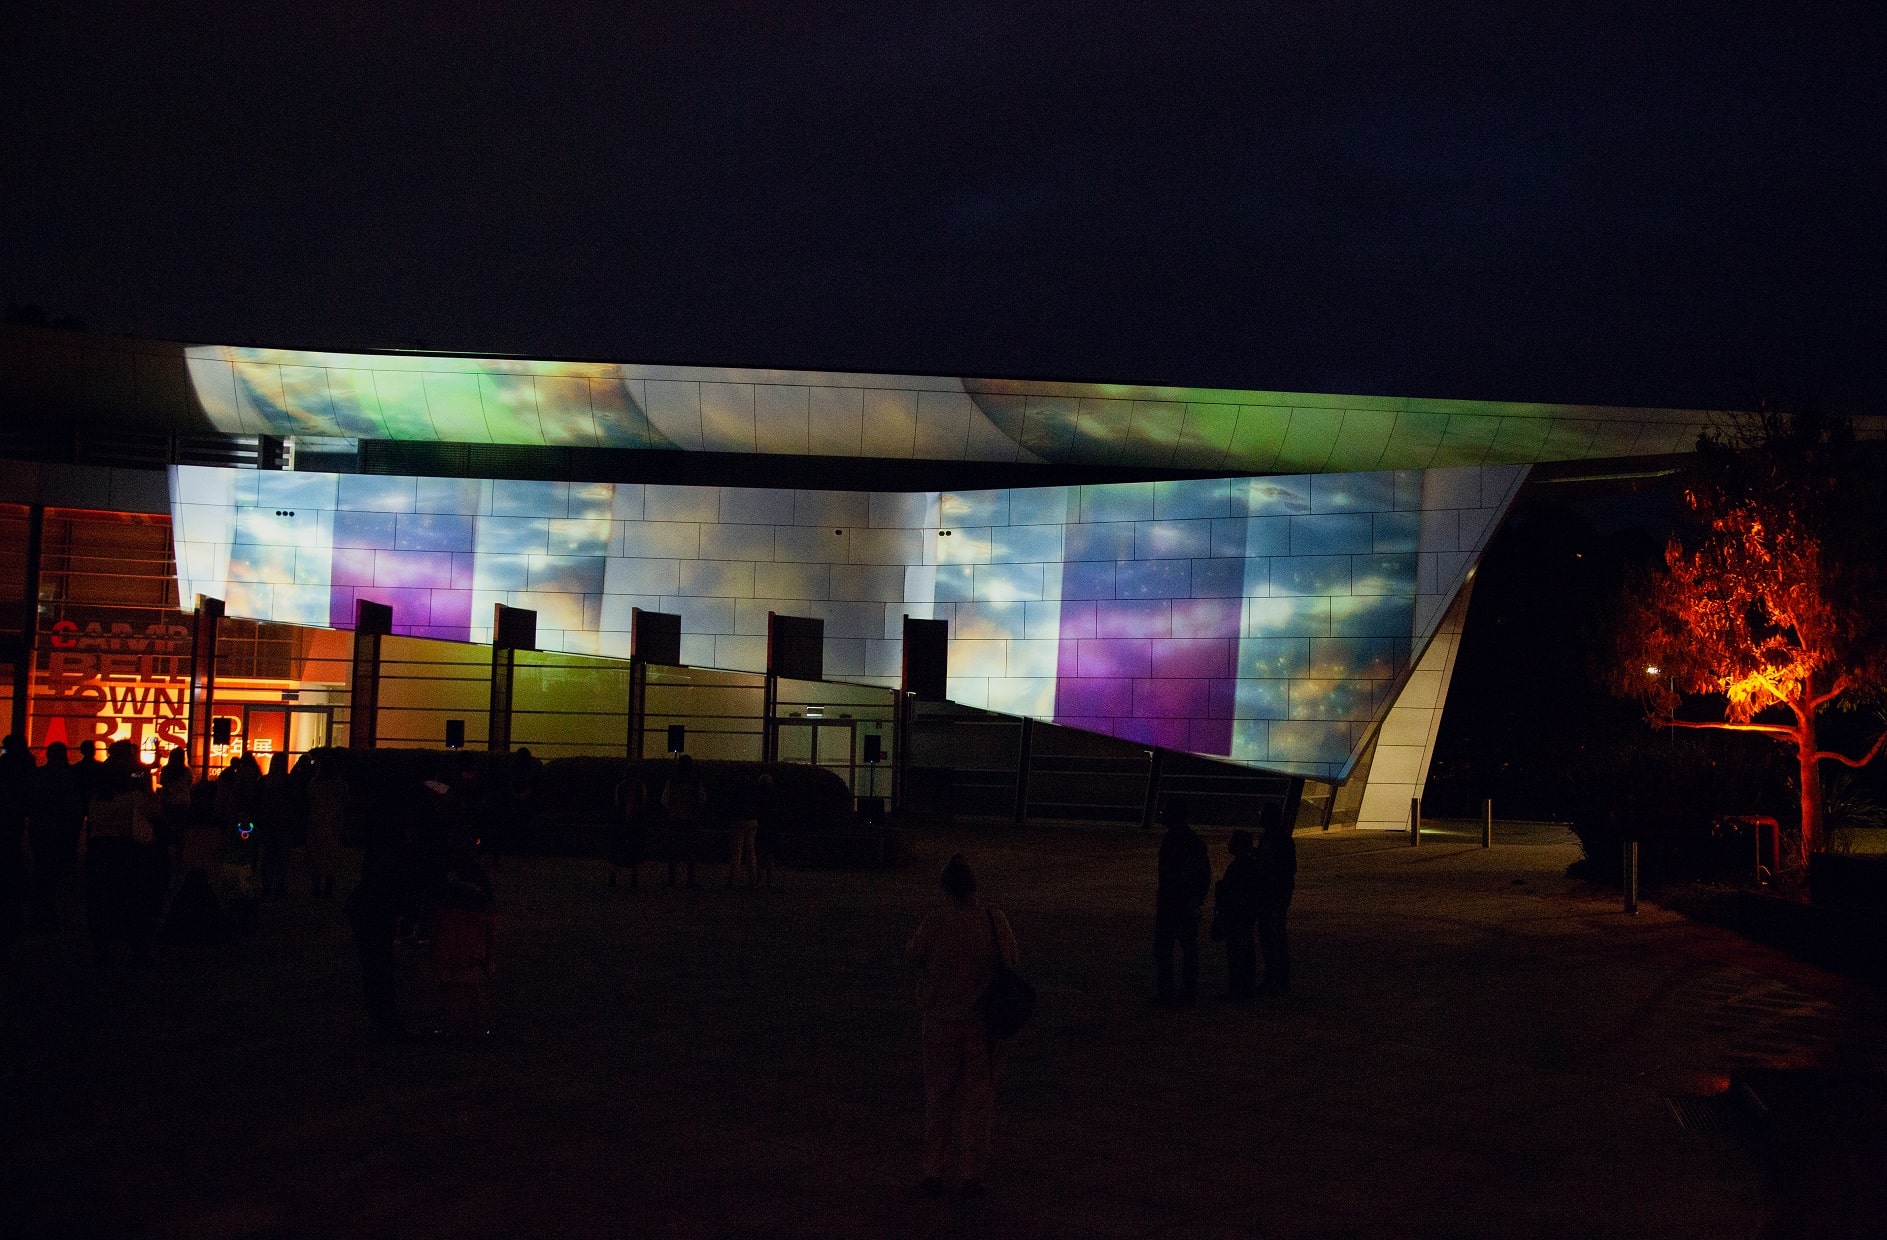 The Campbelltown Arts Centre building with sharp archictectural lines and a rectuacular screen like panel has imagery of glowing purple pillars with a background of light reflecting on light blue rippiling water and a light blue sky is projected onto it, with the dark night sky the backdrop to the building.